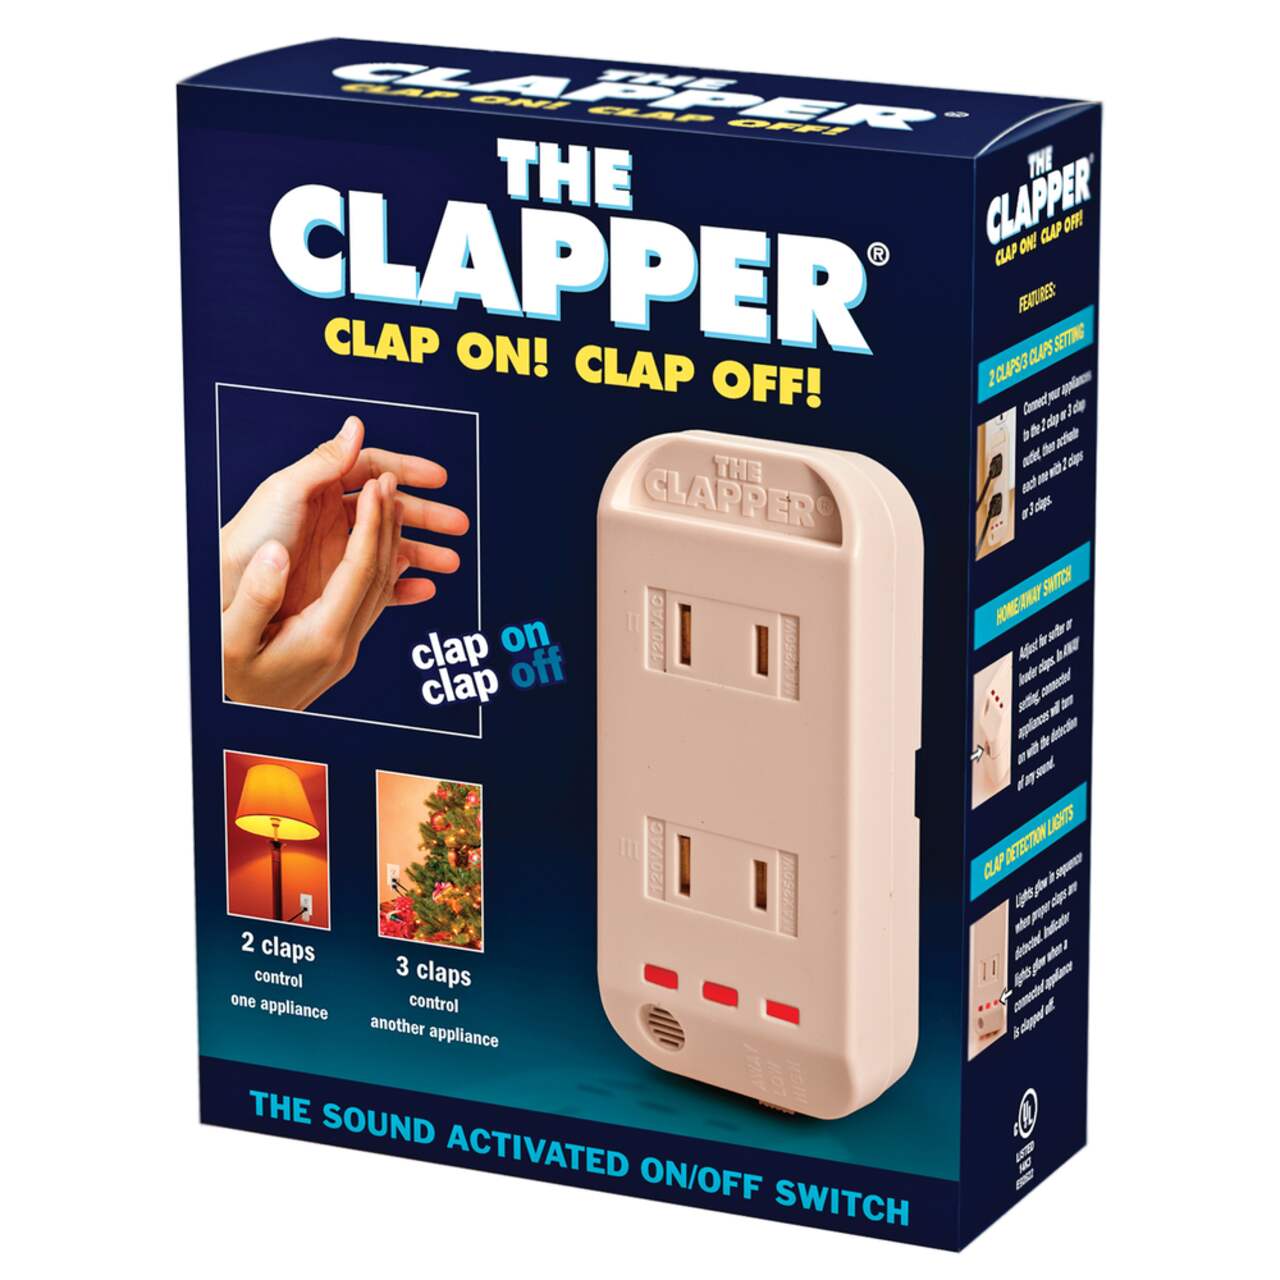 3 Claps Light Control Bulb for Bedroom Table Lamp Upgrade, The Clapper,  Sound Activated ON/Off Solution, Clap Detection, Smart Home, As Seen On TV